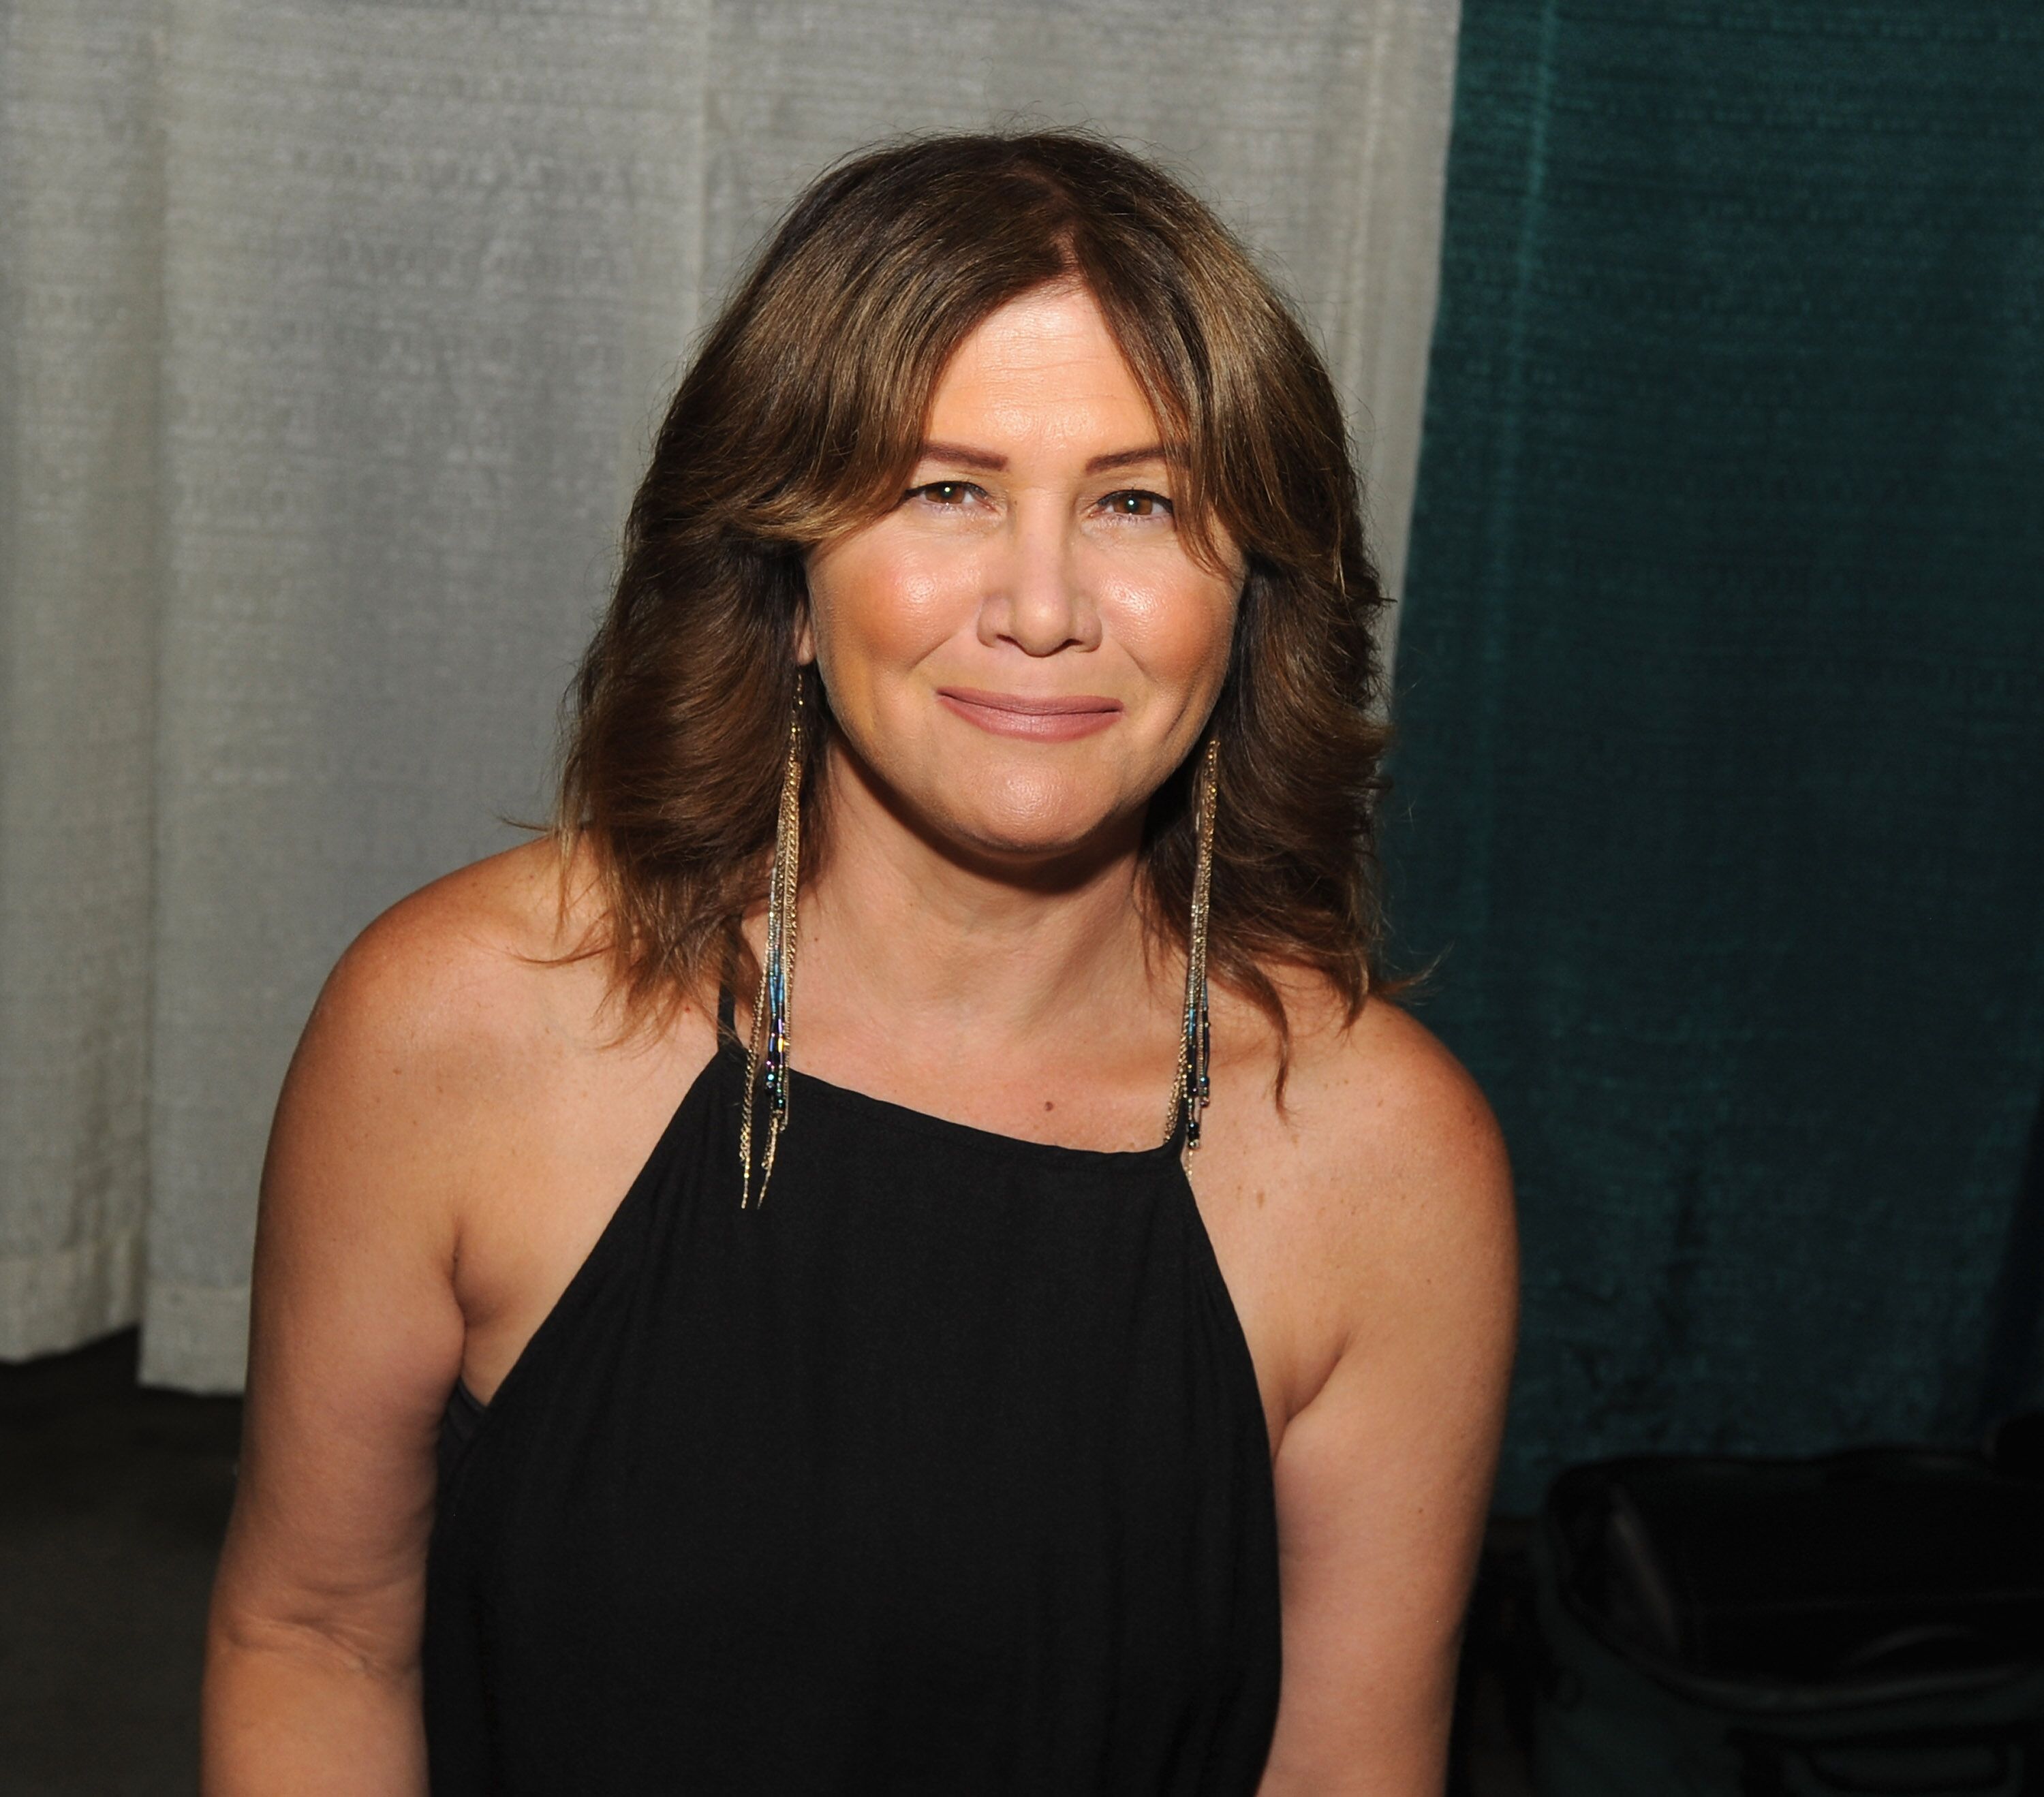 Tracey Gold at the 2018 STL Pop Culture Con in St Charles, Missouri | Source: Getty Images